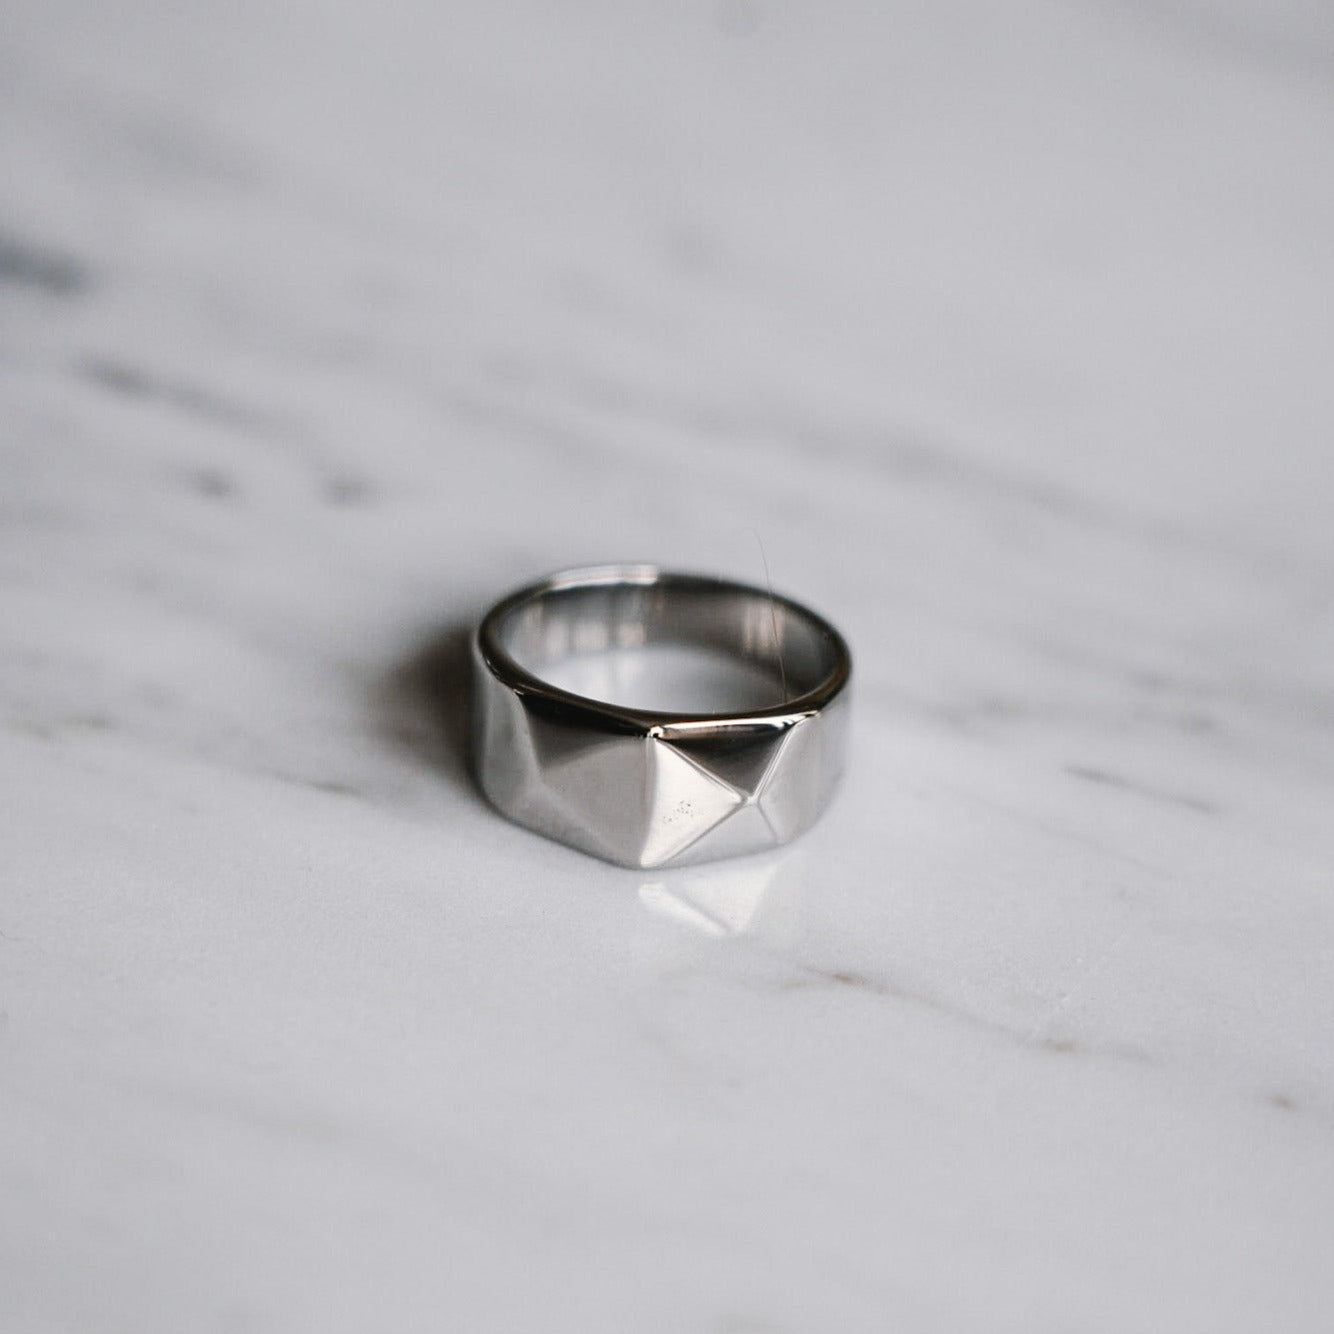 Kant Signature ring - Silver-toned ring